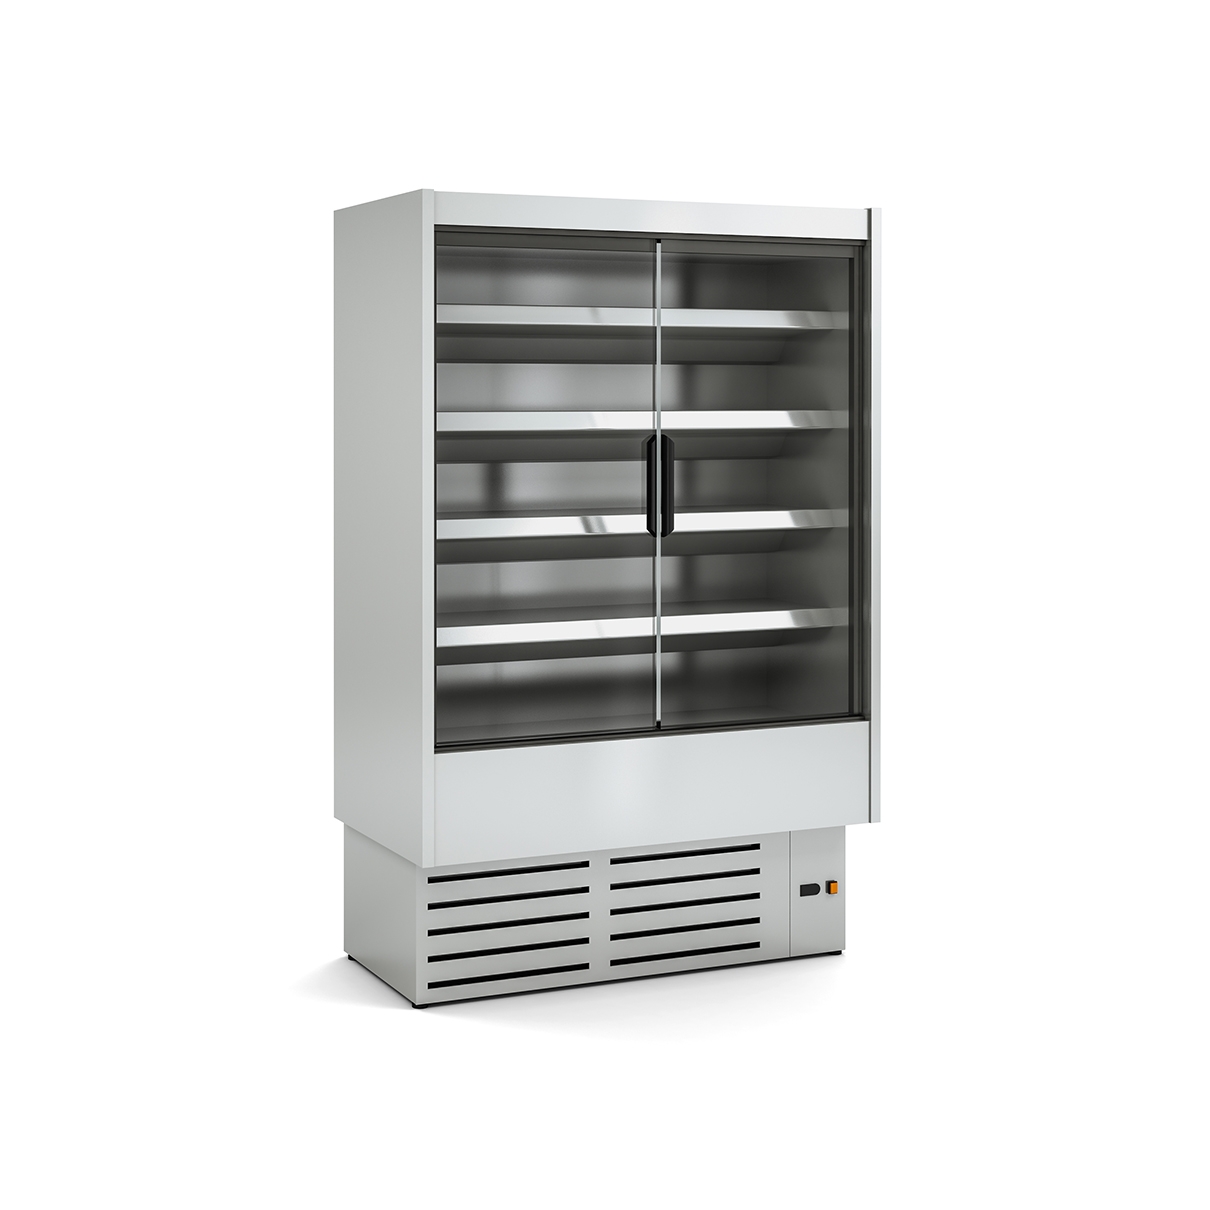 copy of REFRIGERATED WALL-MOUNTED DISPLAY CABINET DG1 M1-M2